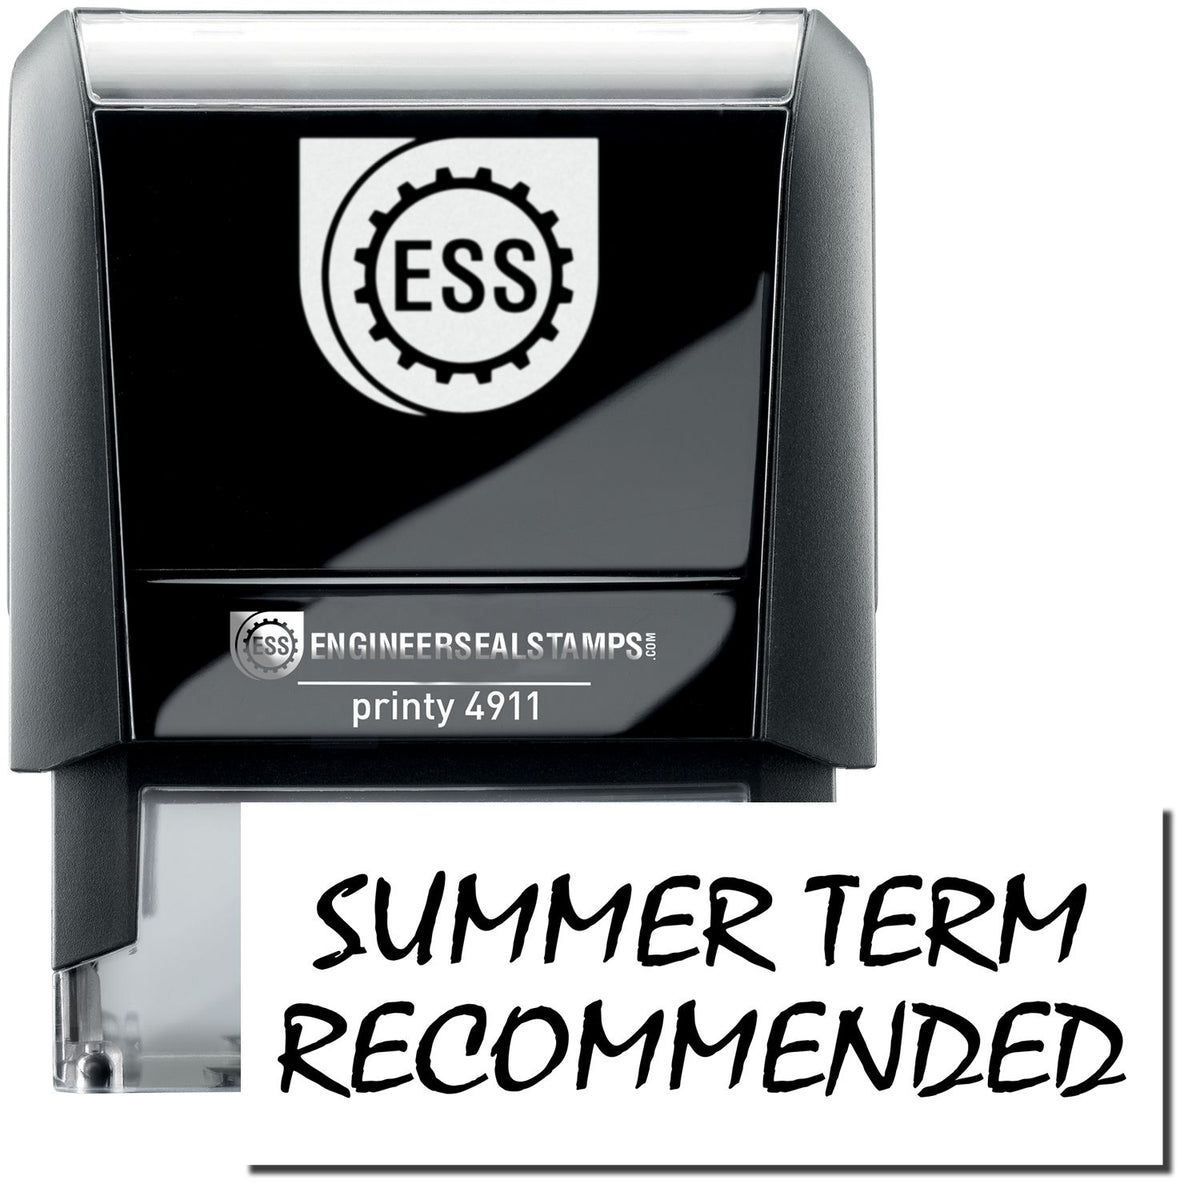 A self-inking stamp with a stamped image showing how the text &quot;SUMMER TERM RECOMMENDED&quot; is displayed after stamping.